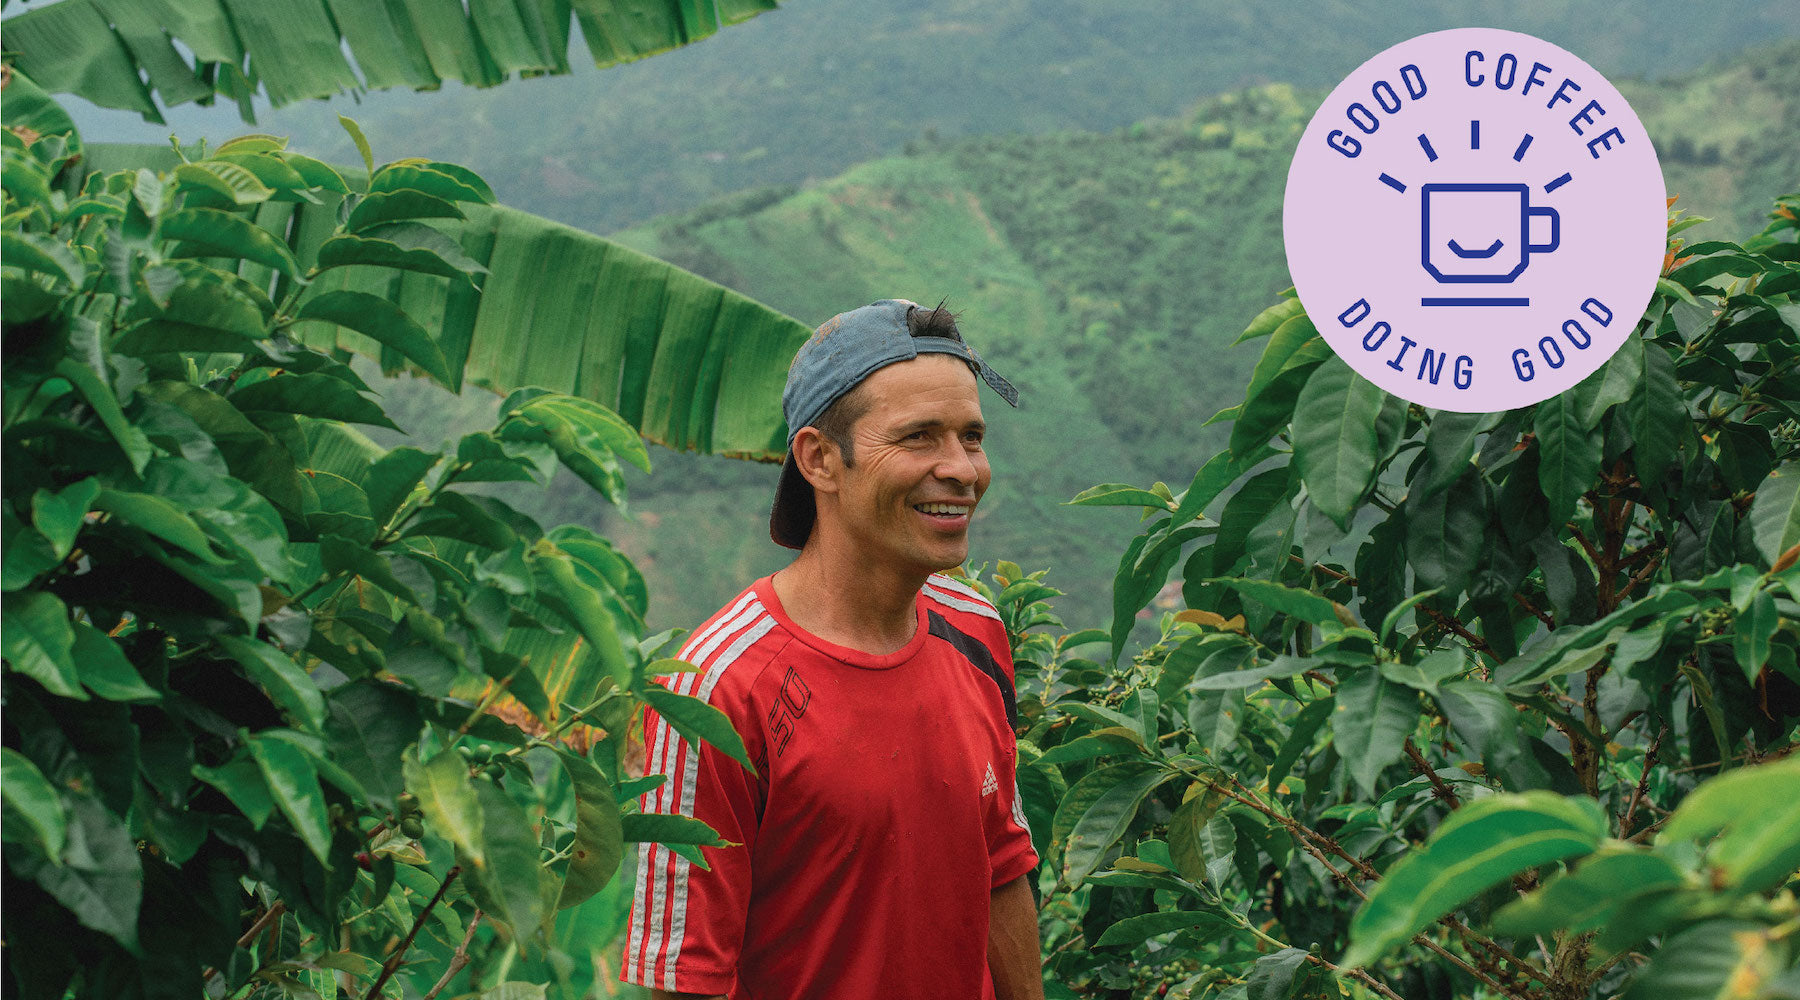 Good Coffee Doing Good in Colombia